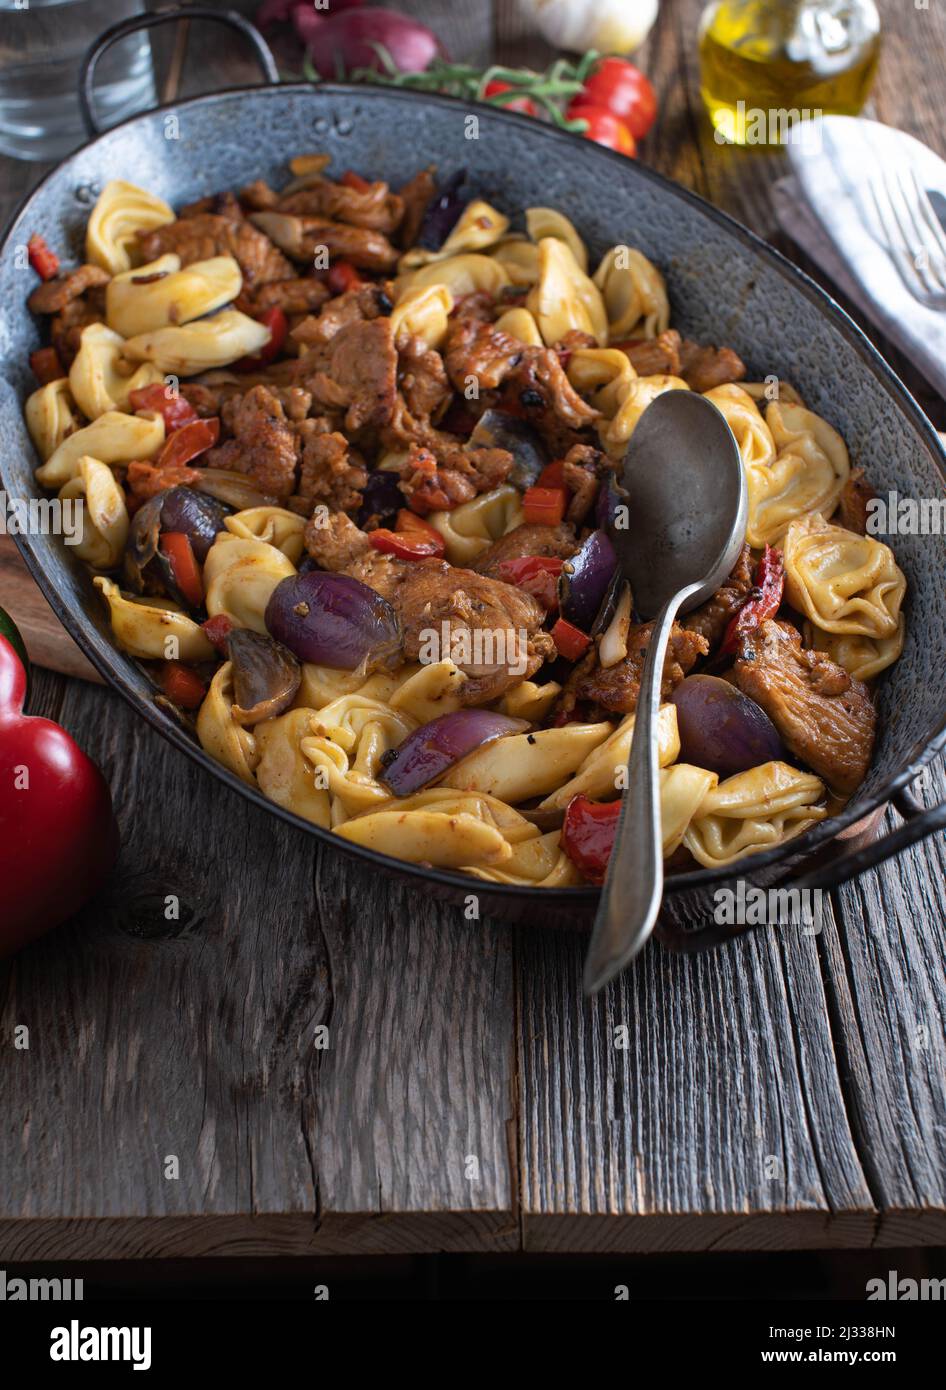 Tortellini dish with sauteed meat, vegetables and sauce in a rustic roasting pan. Italian cuisine Stock Photo